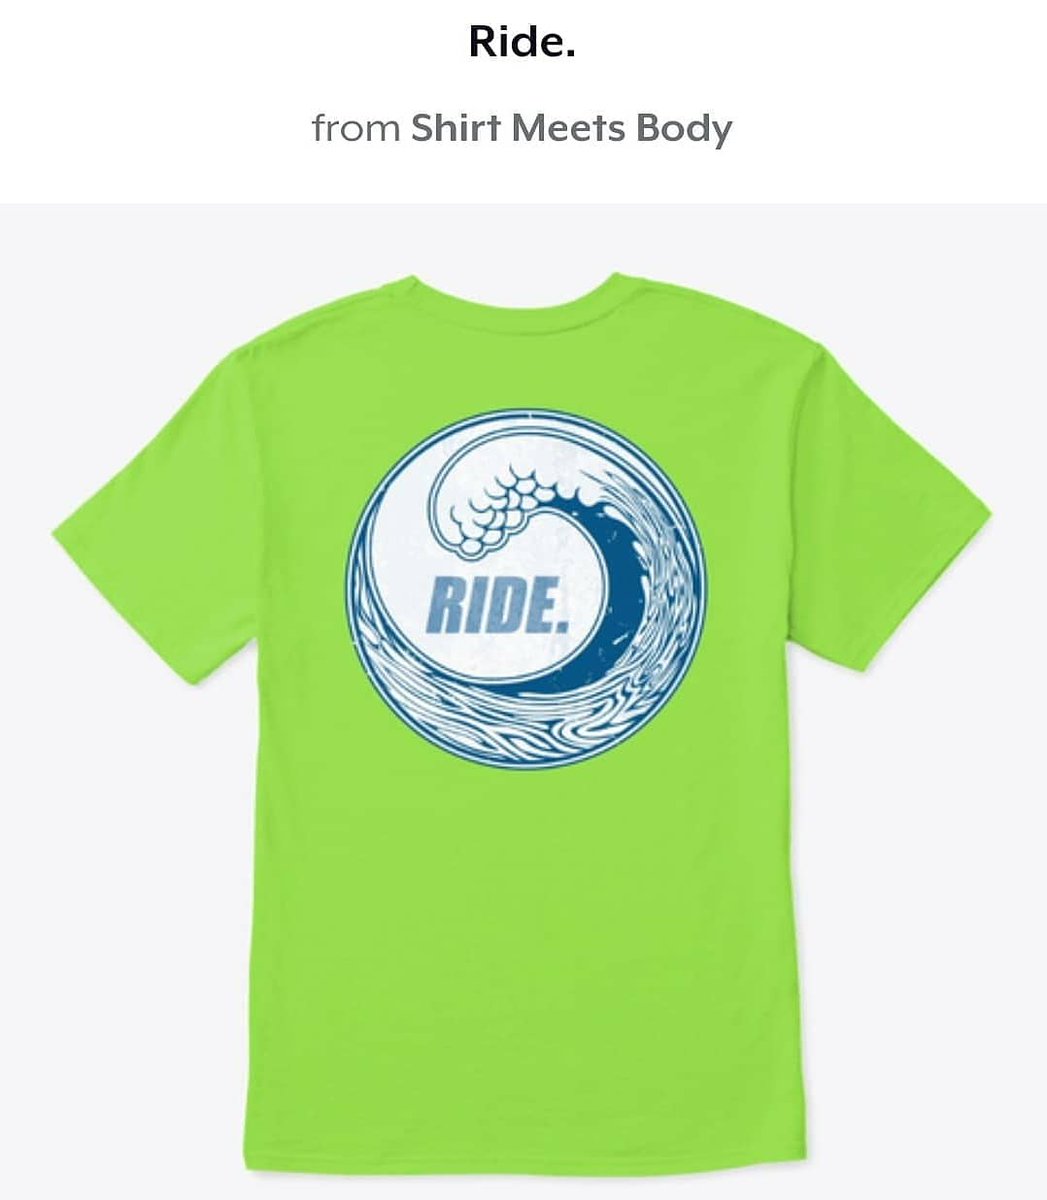 #Neons are always in style. Check out these bold #statementshirts from teespring.com/ride-the-waves…

#FreeShipping #Teespring #RideOrDie #Summer #StreetStyle #StreetWear #StreetFashion #beauty #Beach #Ocean #Vaporwave #Retro